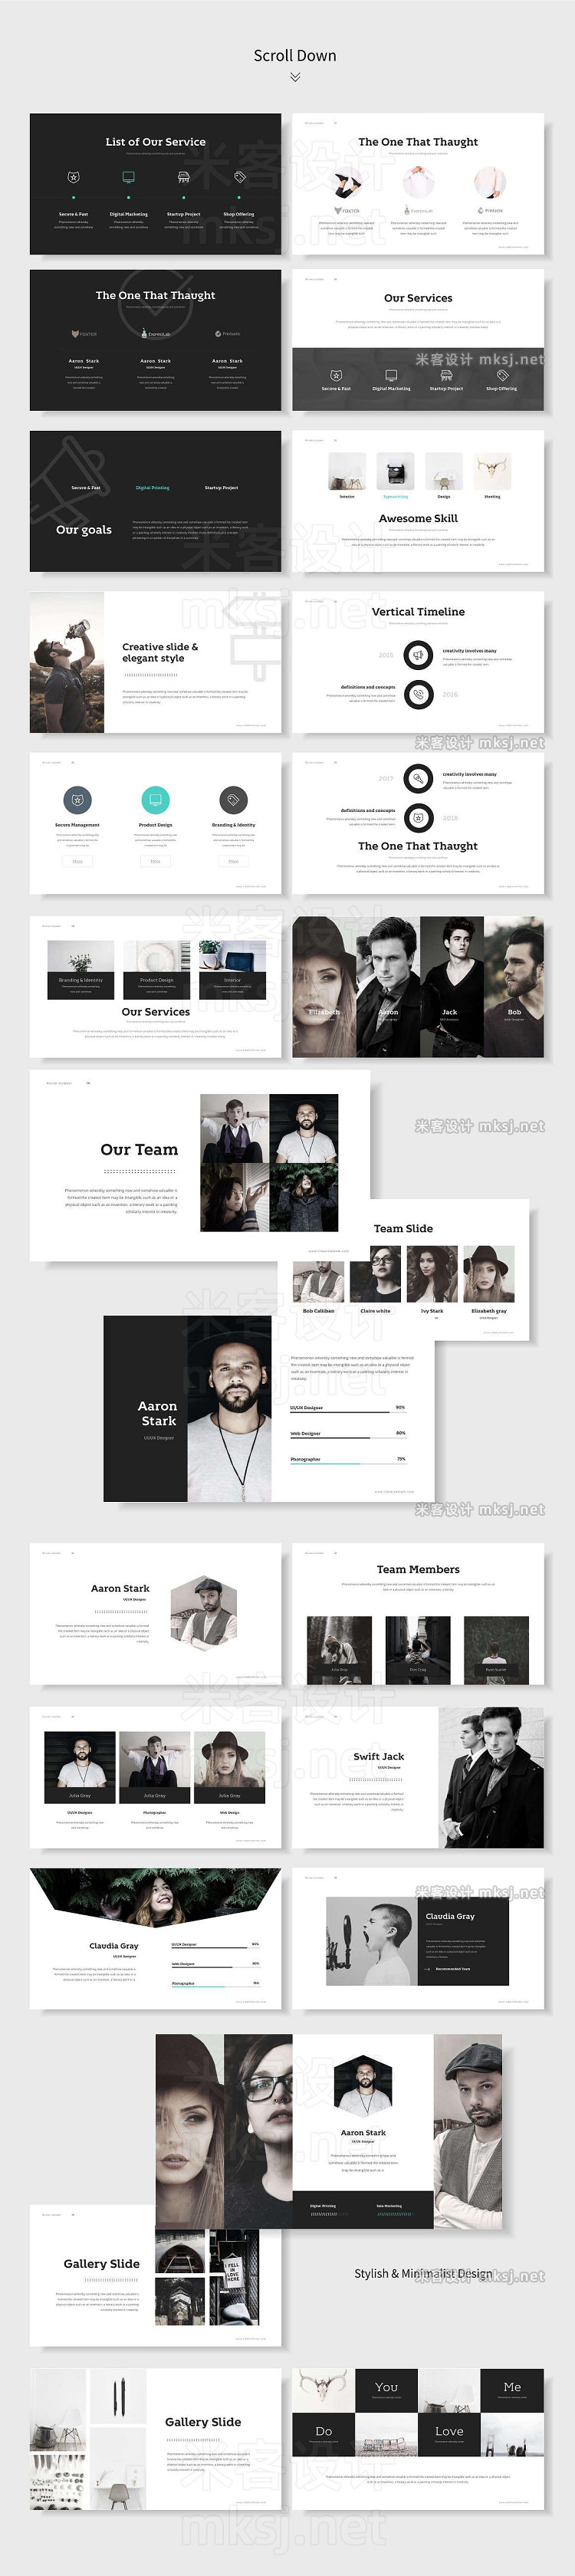 PPT模板 Simpleday Powerpoint Template